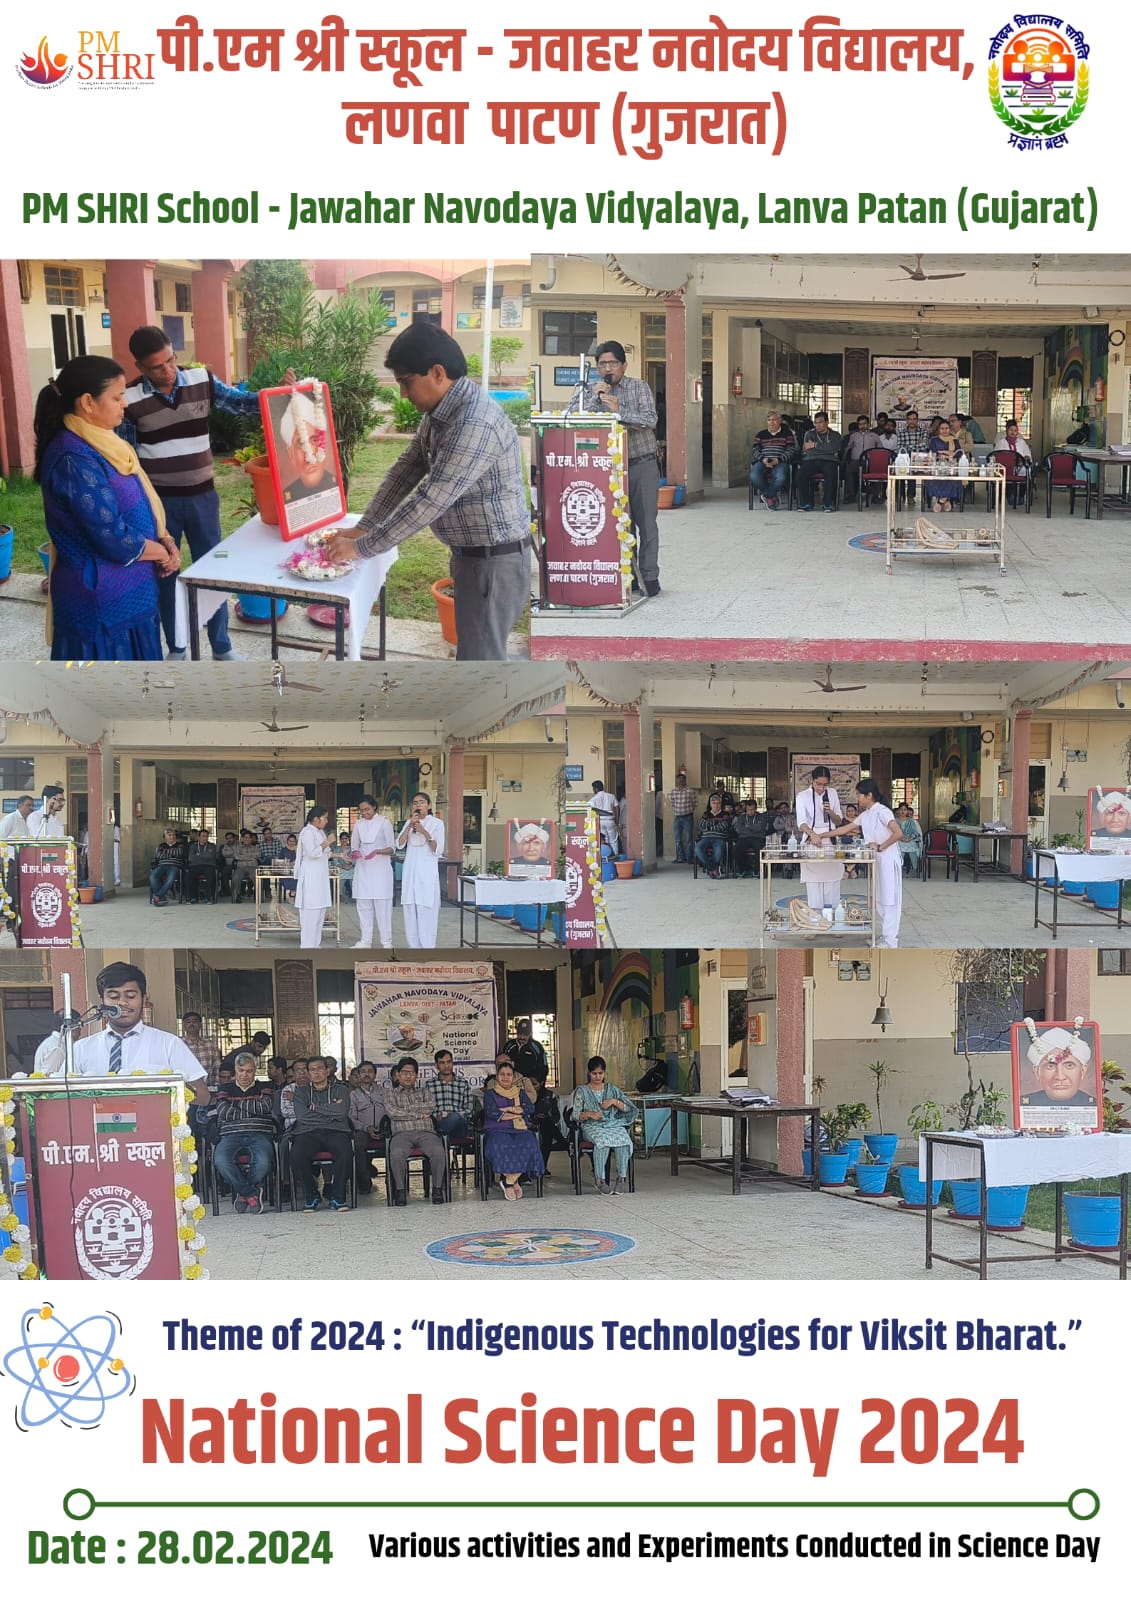 National Science Day celebration in JNV Patan on 28.02.2024